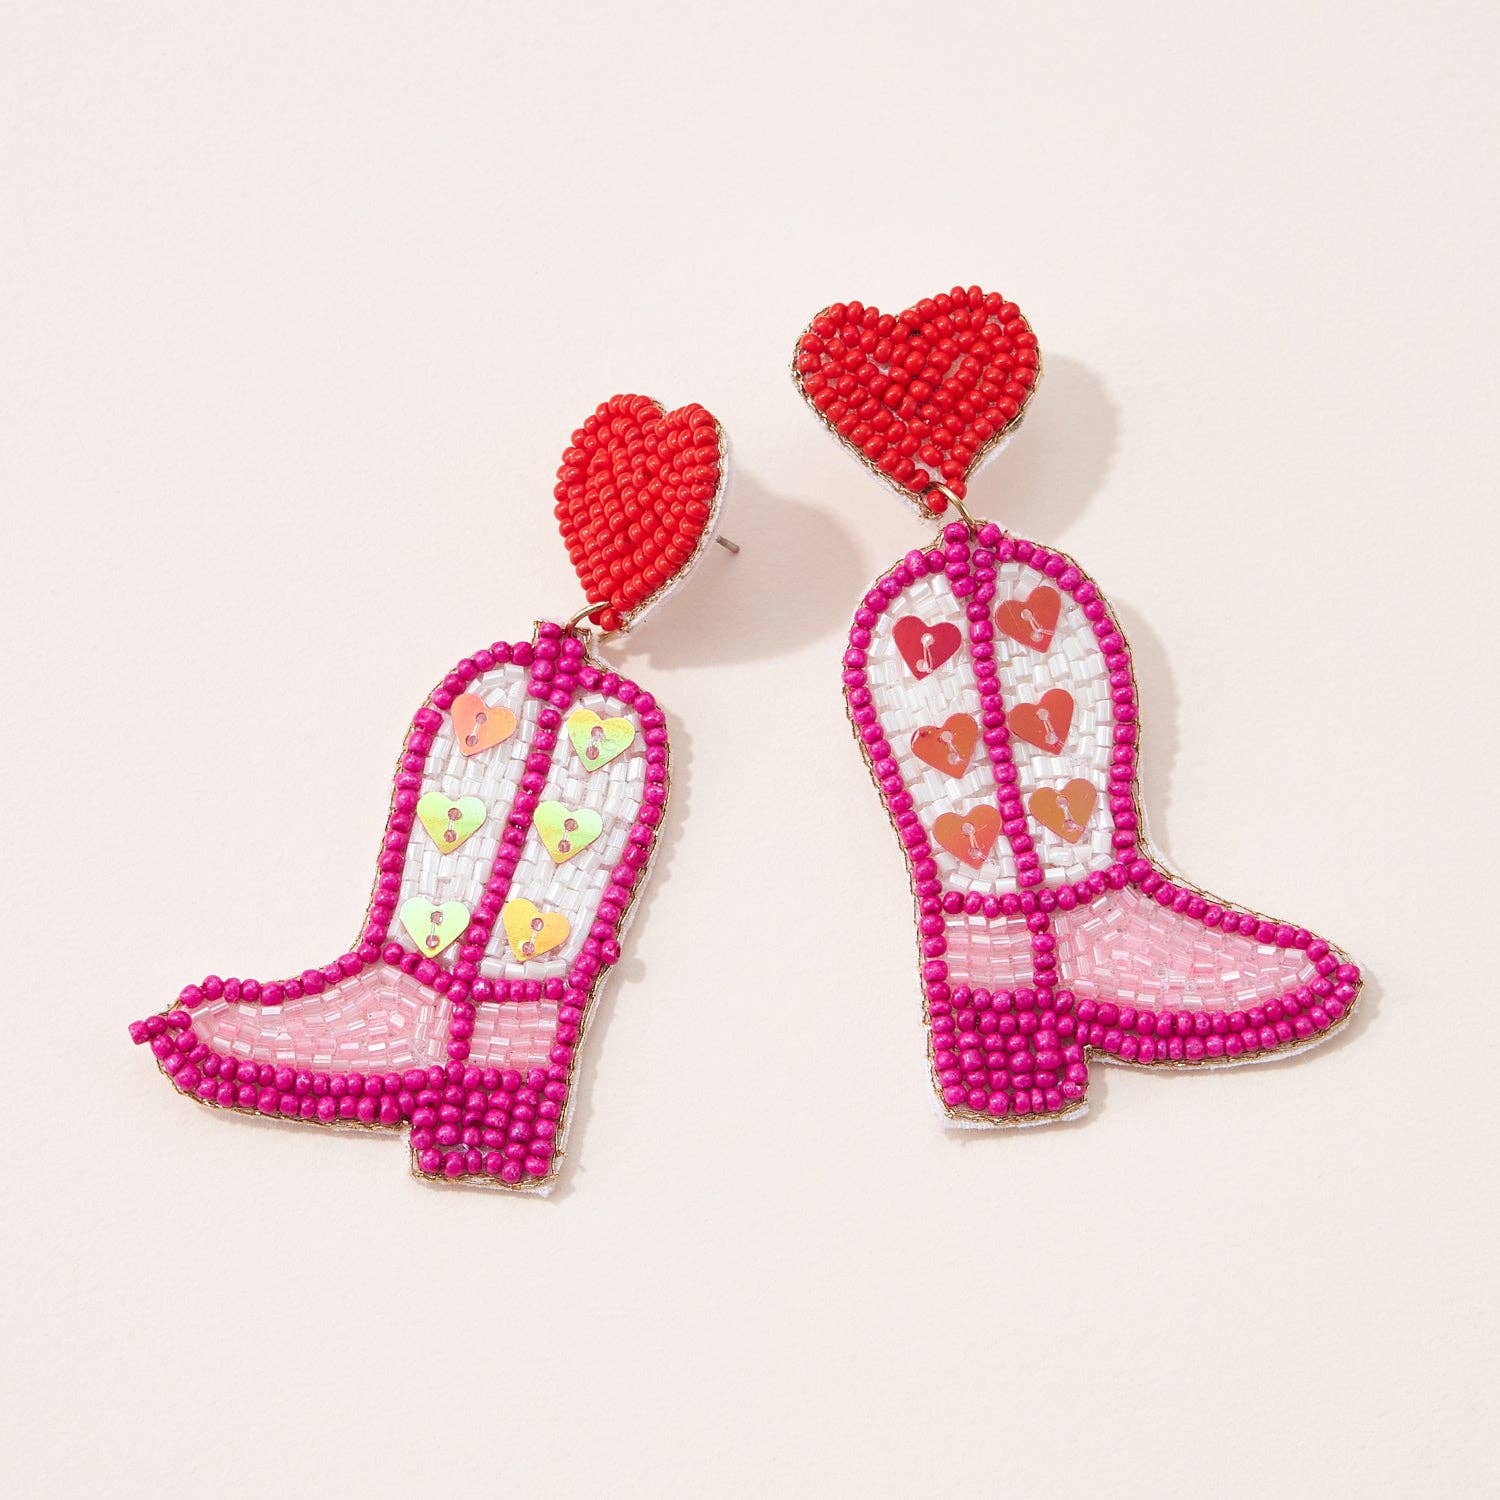 Cowboy Boots & Hearts Post Earrings for Your Loved Ones